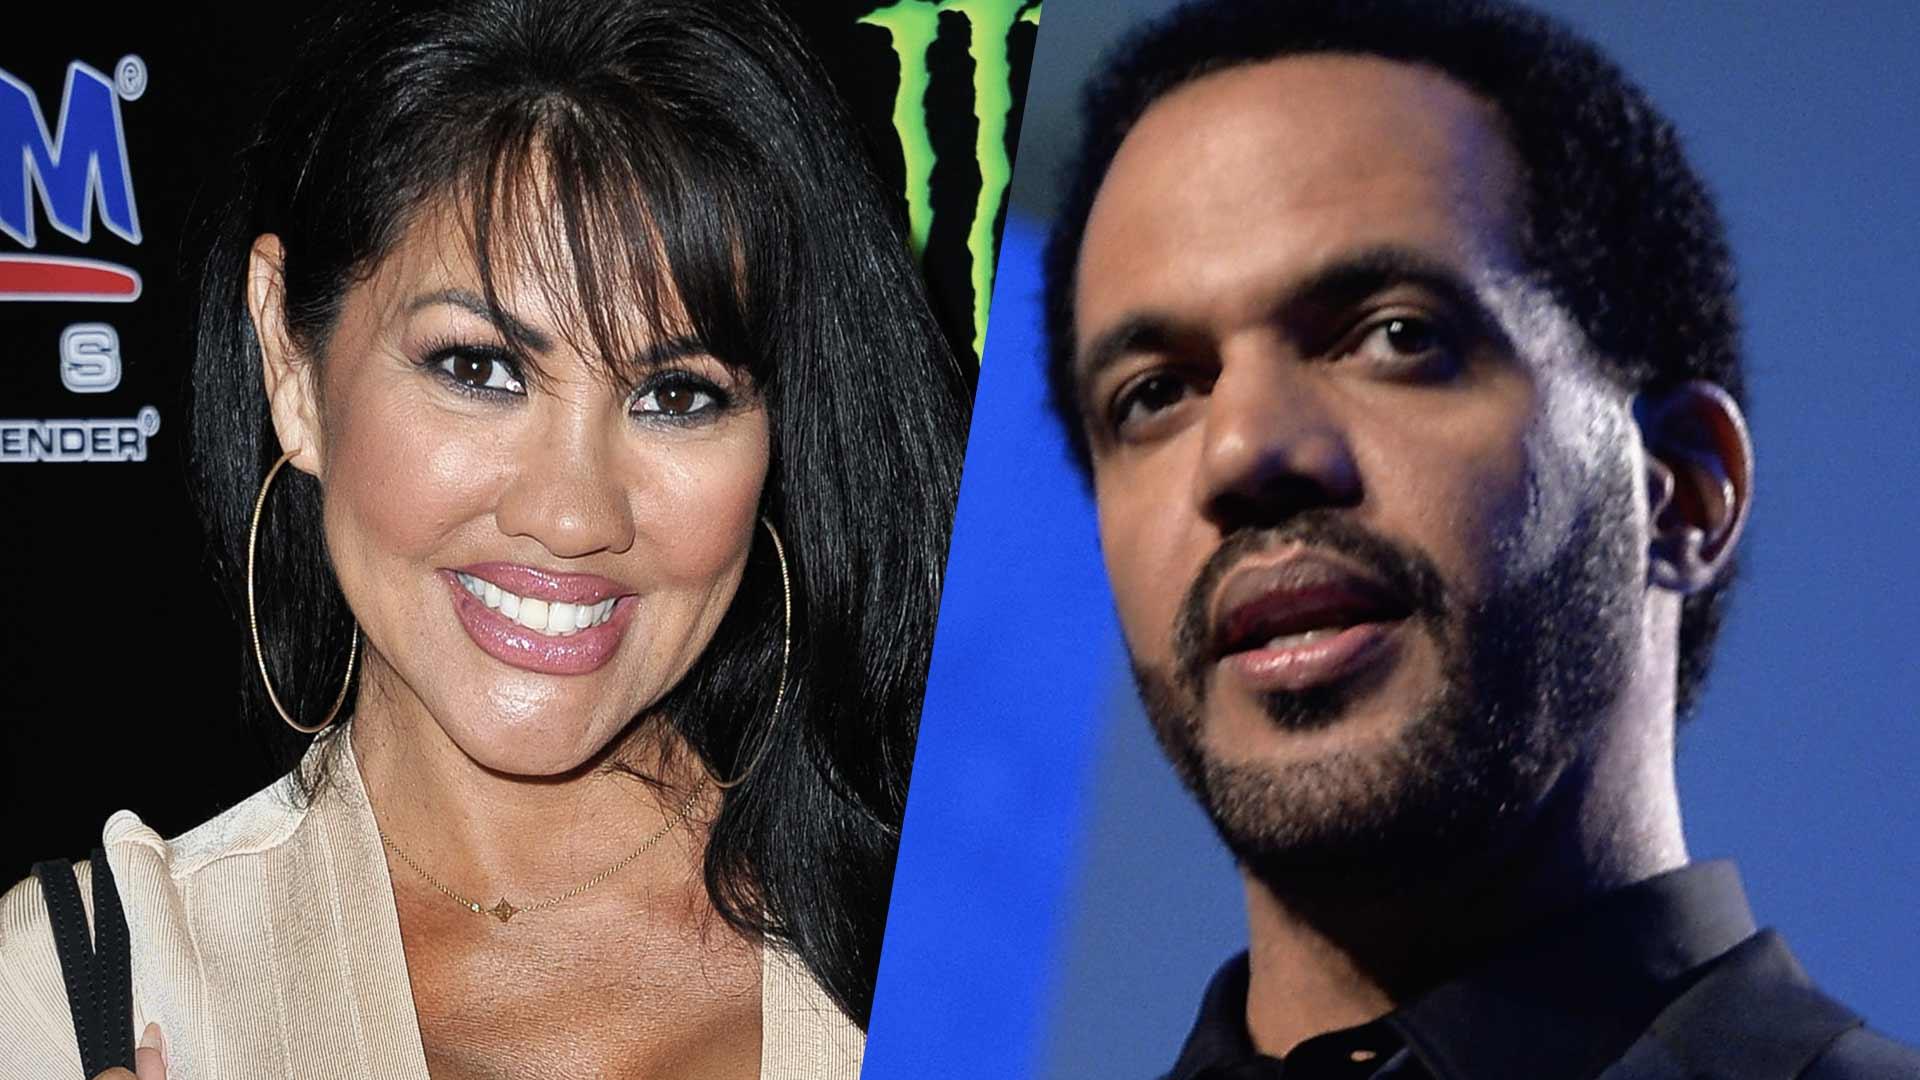 Mia St. John Claims Hospital Did Not Properly Treat Kristoff’s Mental Illness, Weighing Legal Options